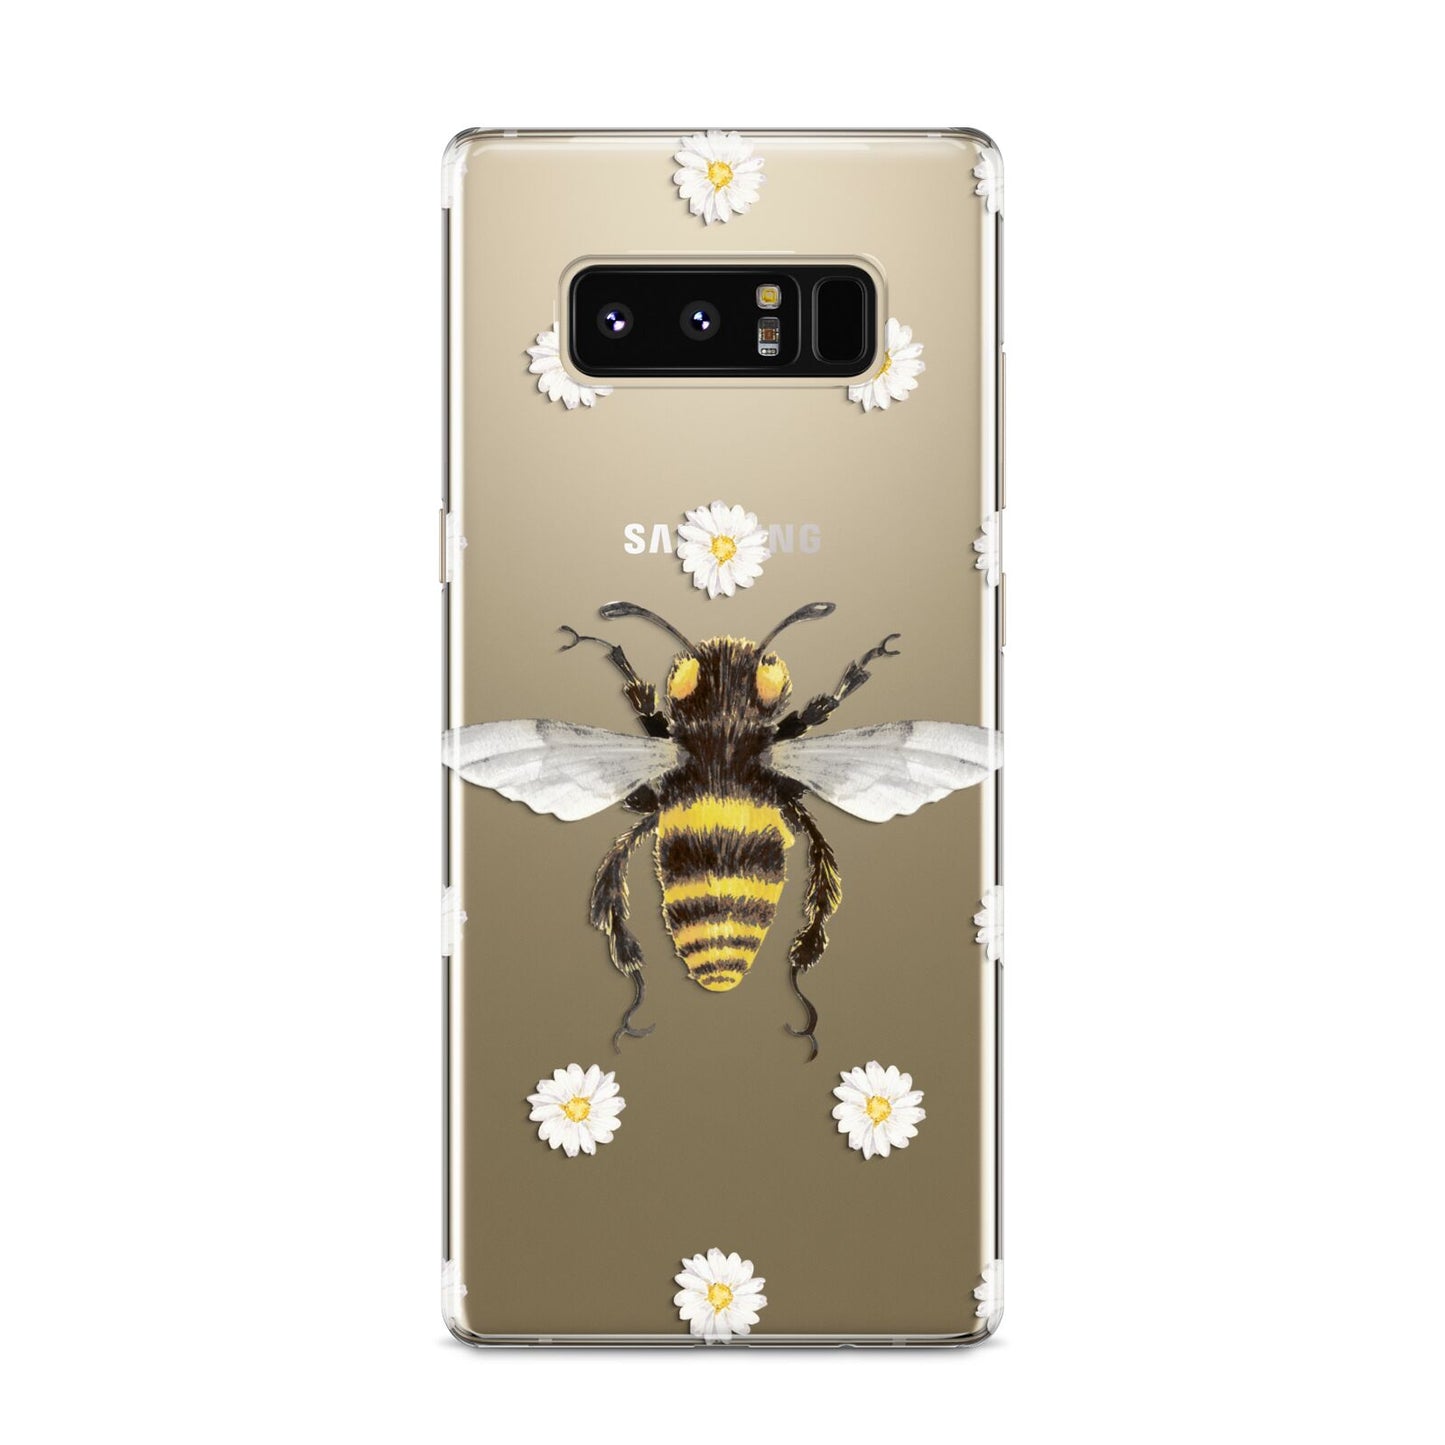 Bee Illustration with Daisies Samsung Galaxy S8 Case